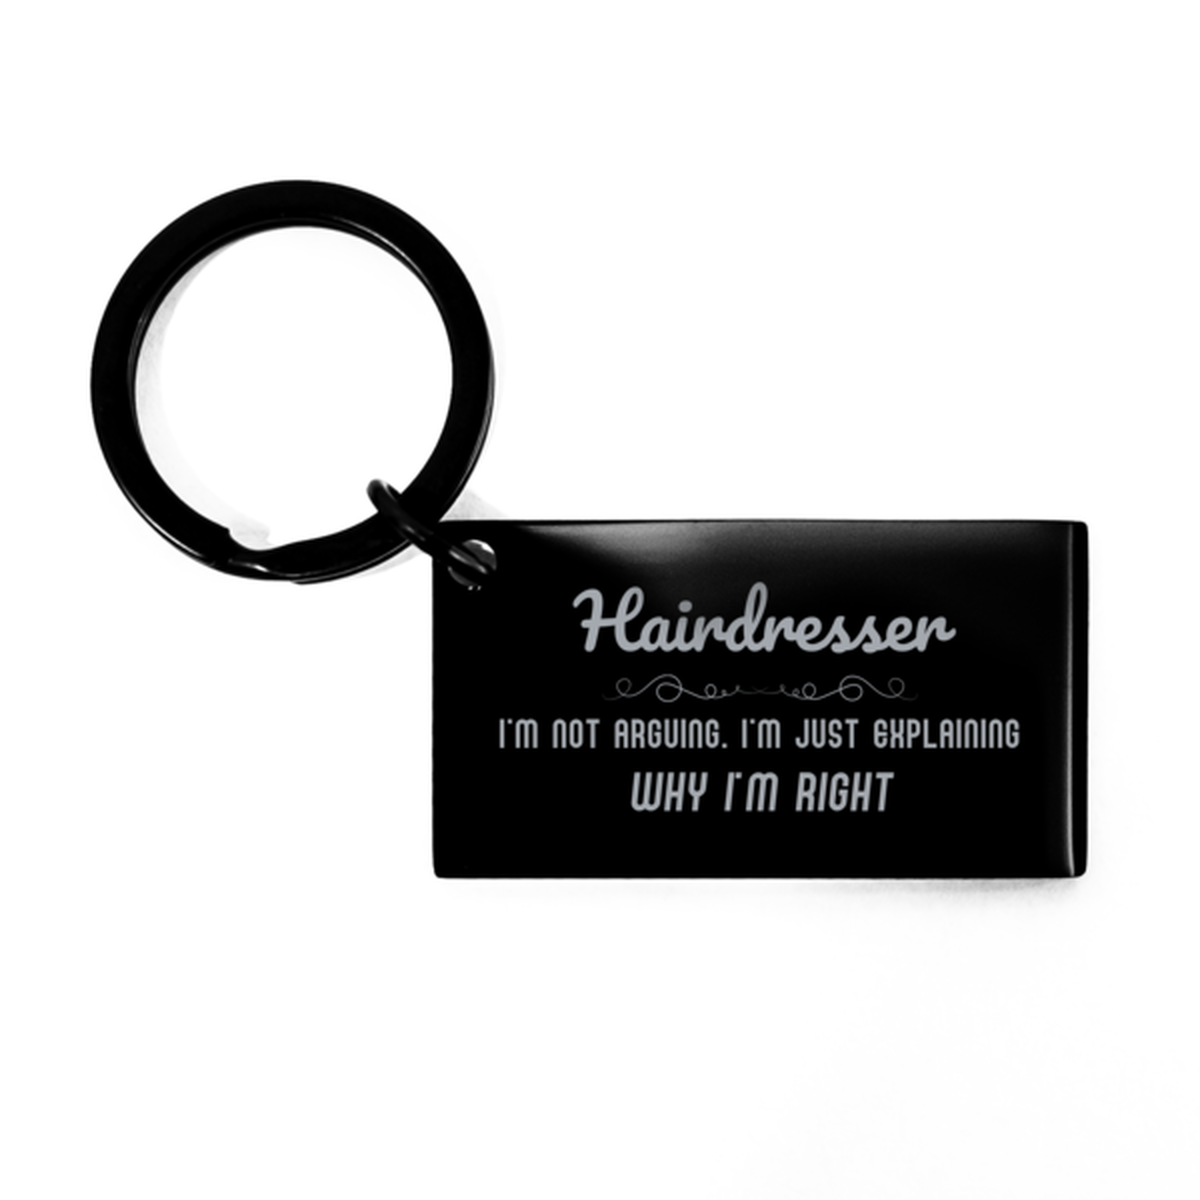 Hairdresser I'm not Arguing. I'm Just Explaining Why I'm RIGHT Keychain, Funny Saying Quote Hairdresser Gifts For Hairdresser Graduation Birthday Christmas Gifts for Men Women Coworker